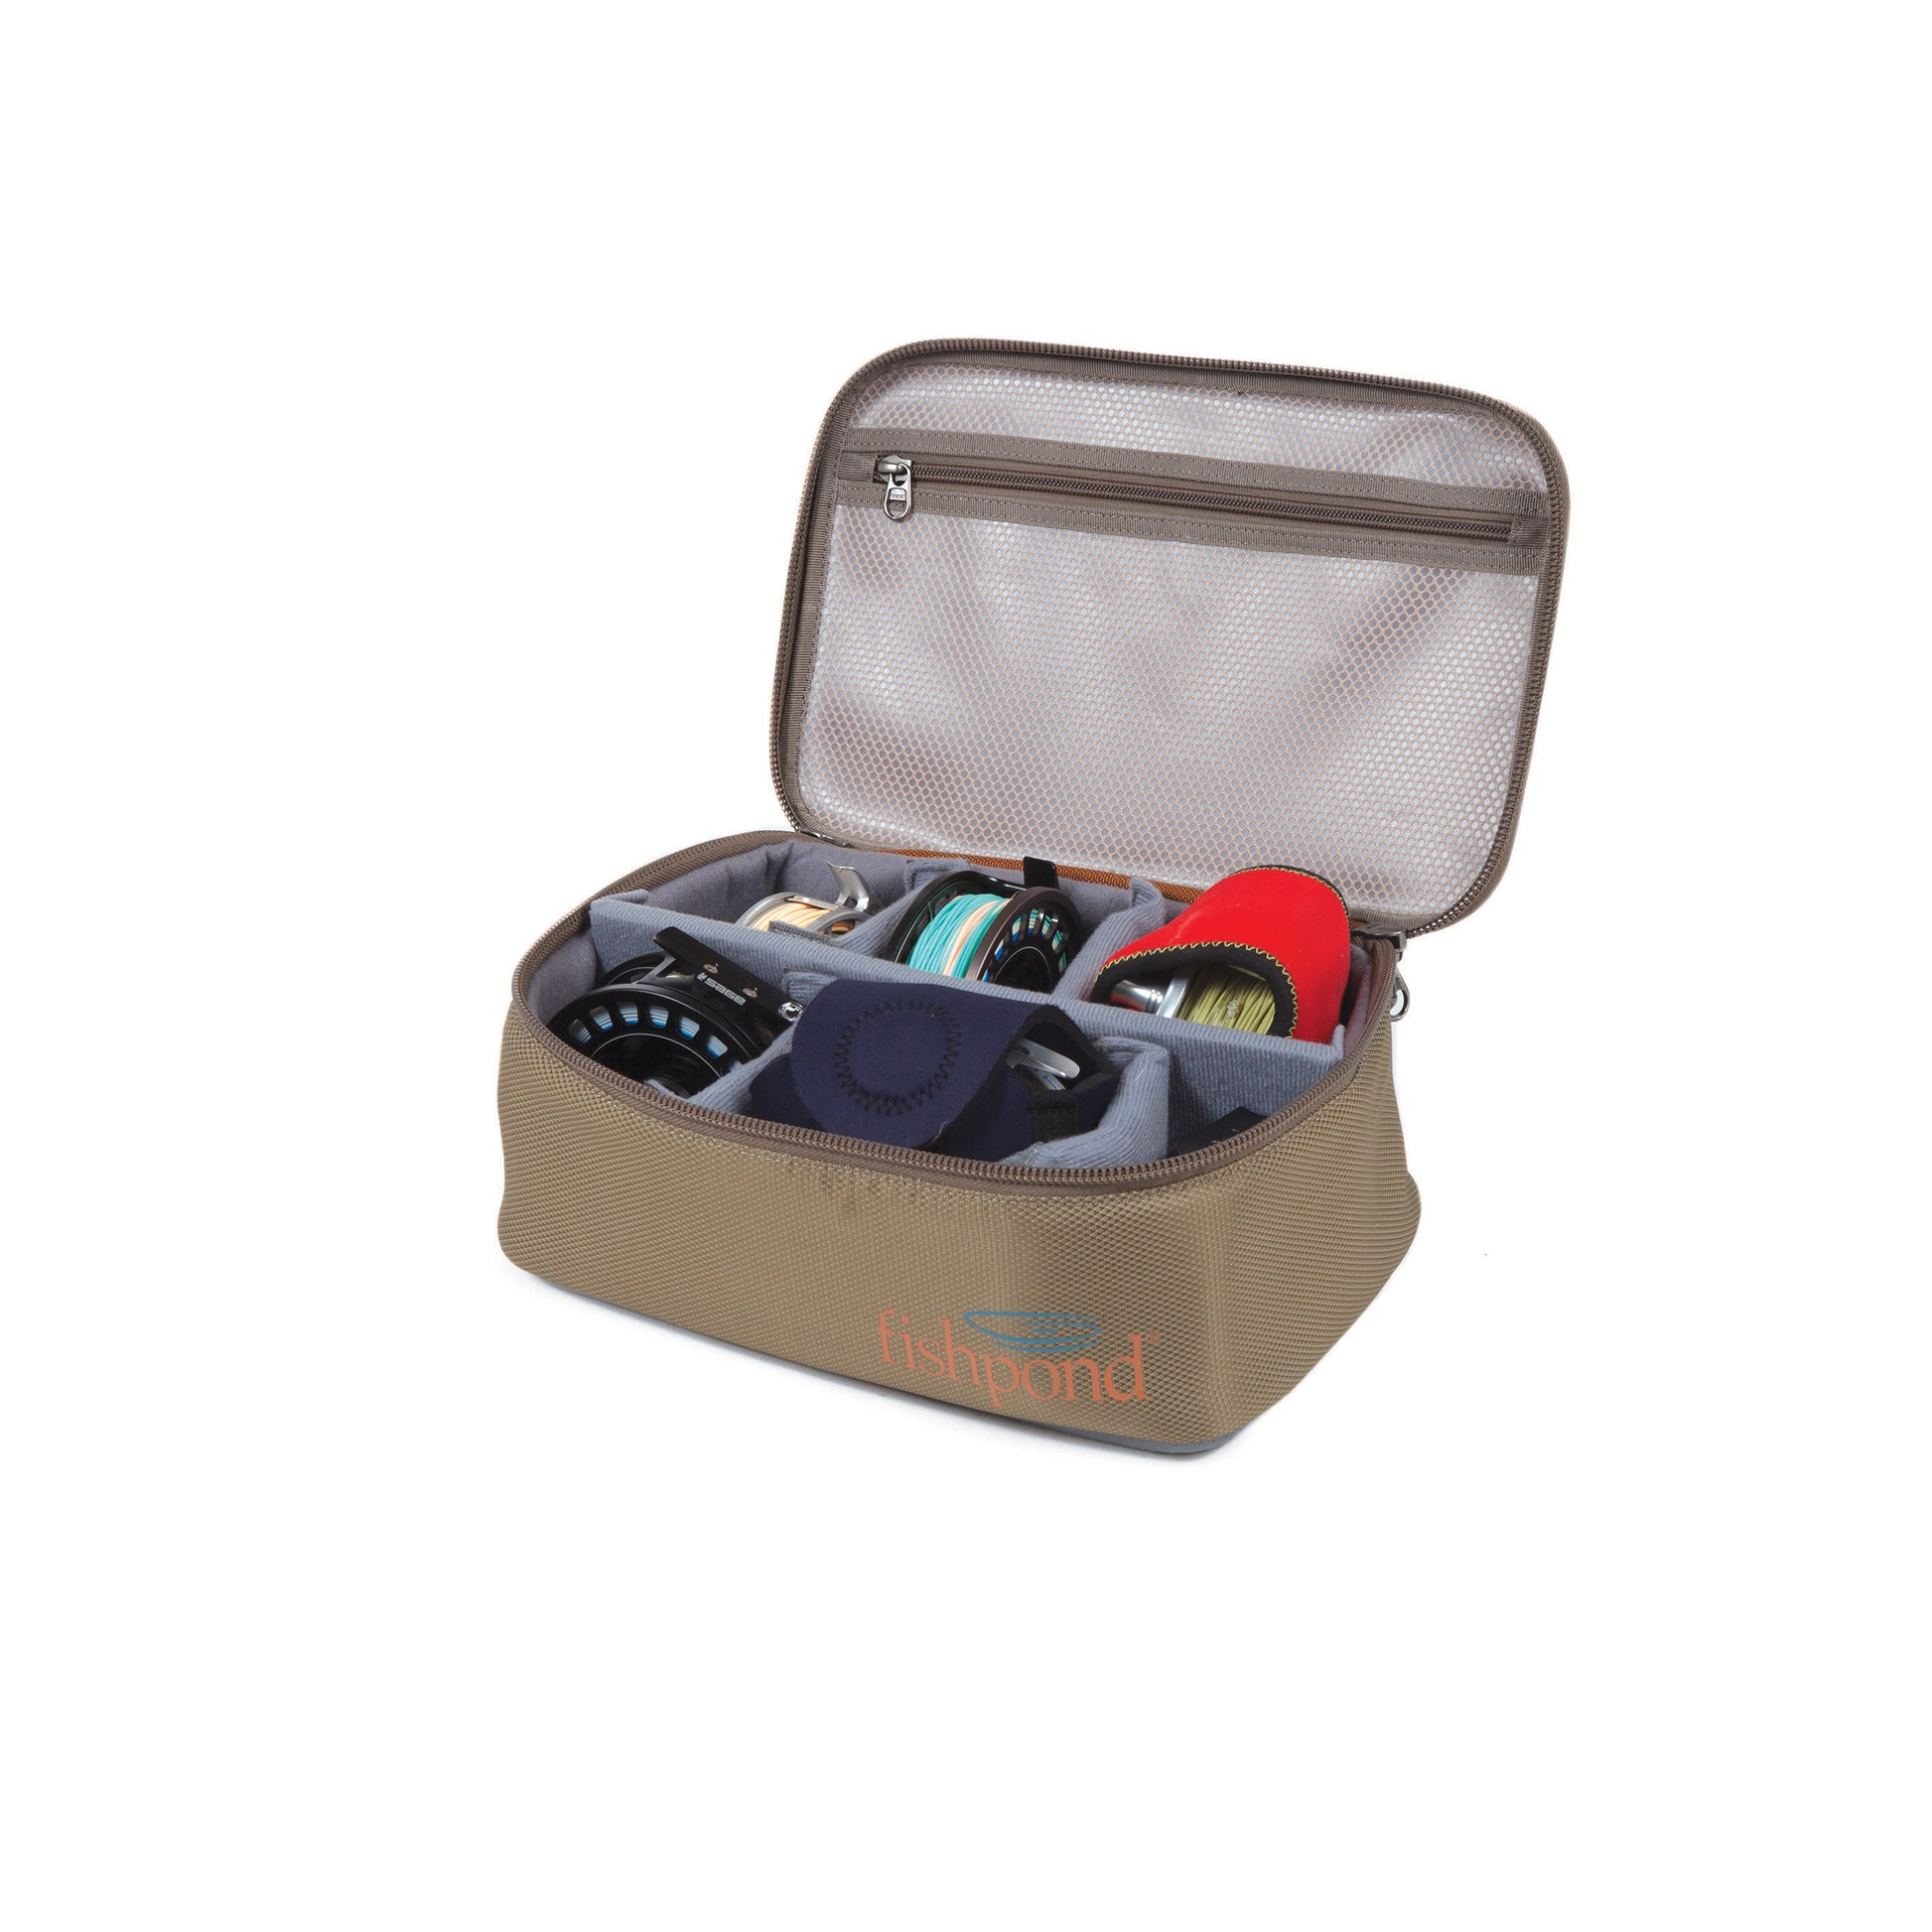 Fishpond Ripple Reel Case Large – The Confluence Fly Shop